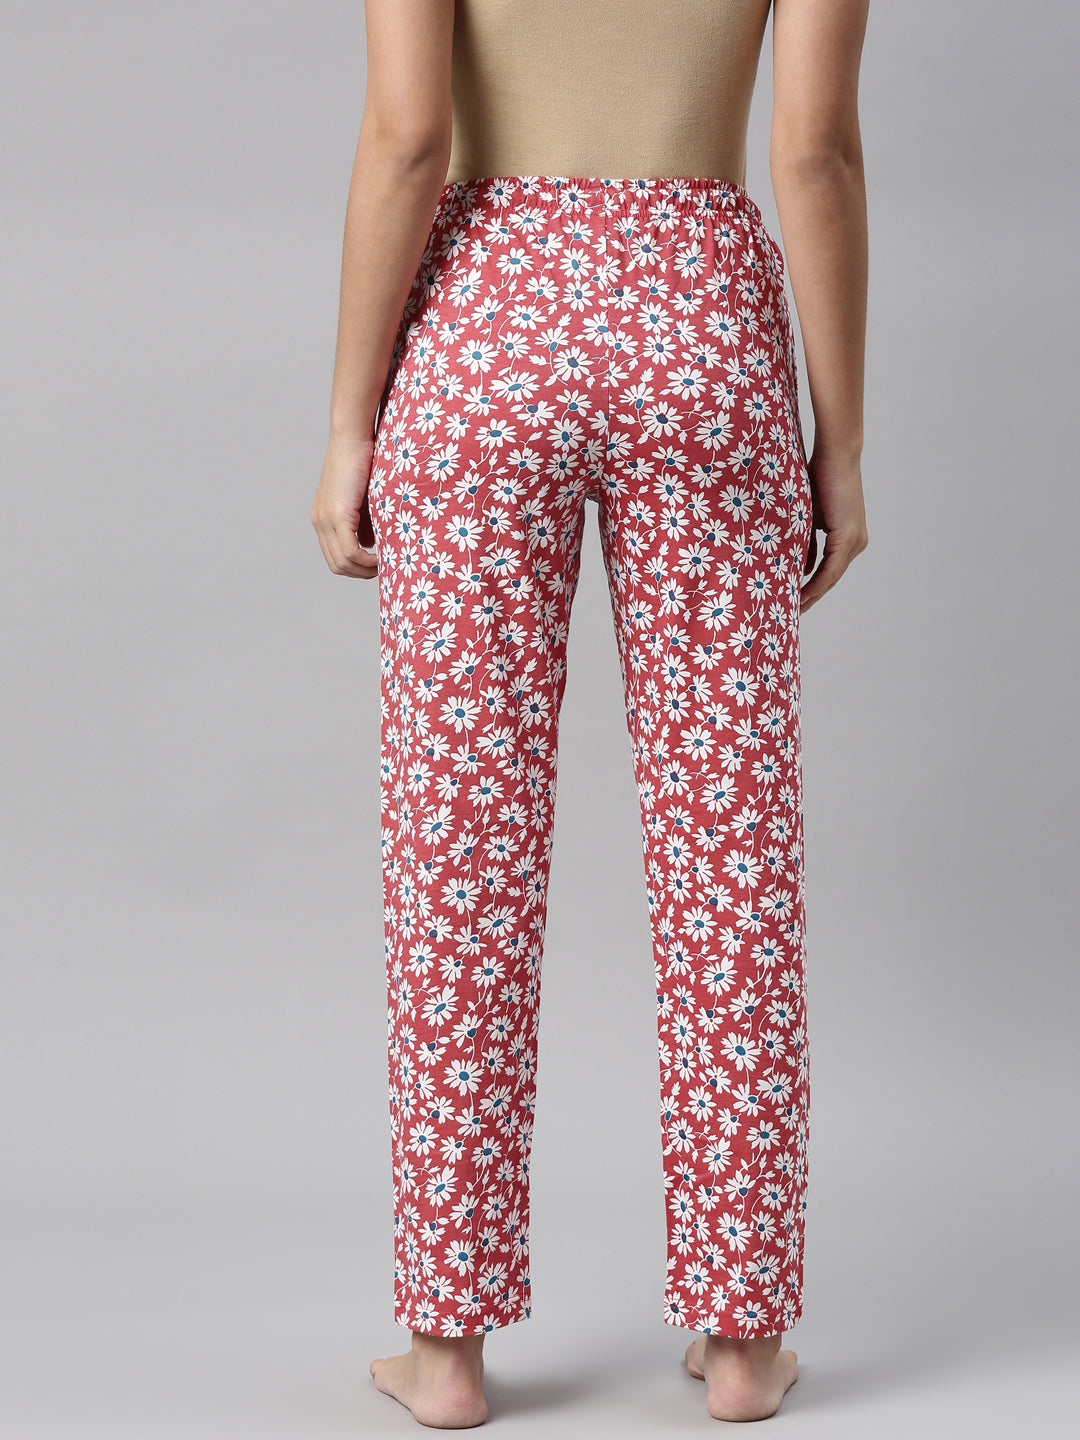 Lounge pants for women with pockets- Loungewear - Cotton printed